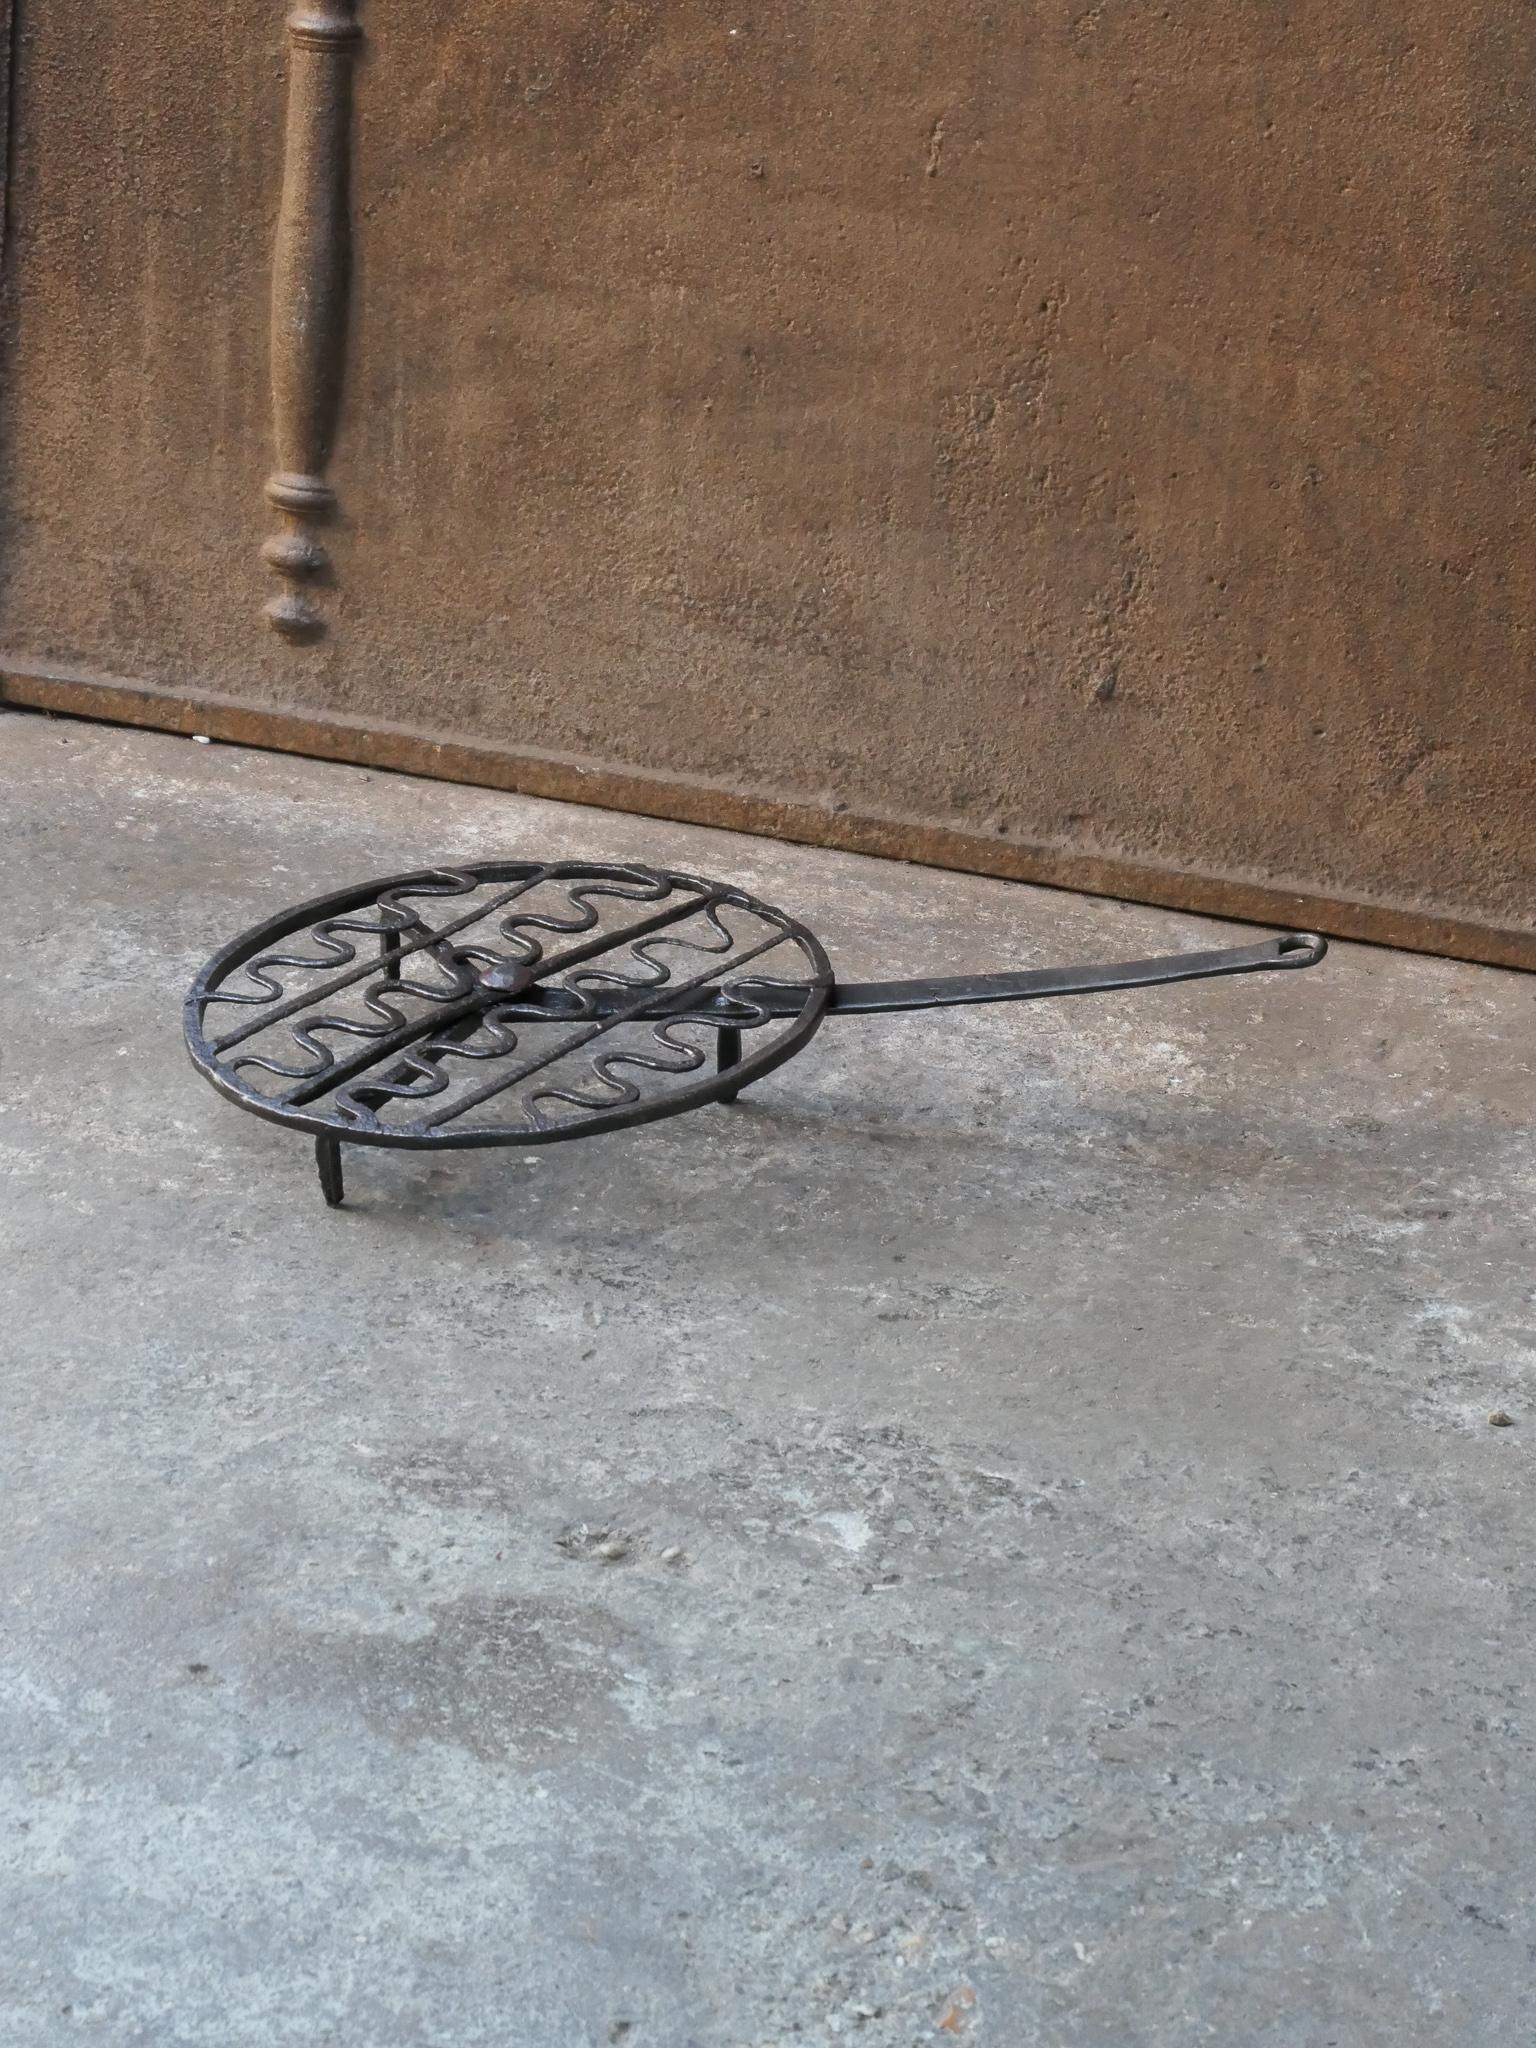 17th - 18th Century French rotating gridiron made of wrought iron. It was used to prepare small pieces of meat quickly over the fire. Sometimes they were put in the fire or else on a trivet, depending on the size of the fire. The gridiron is in a